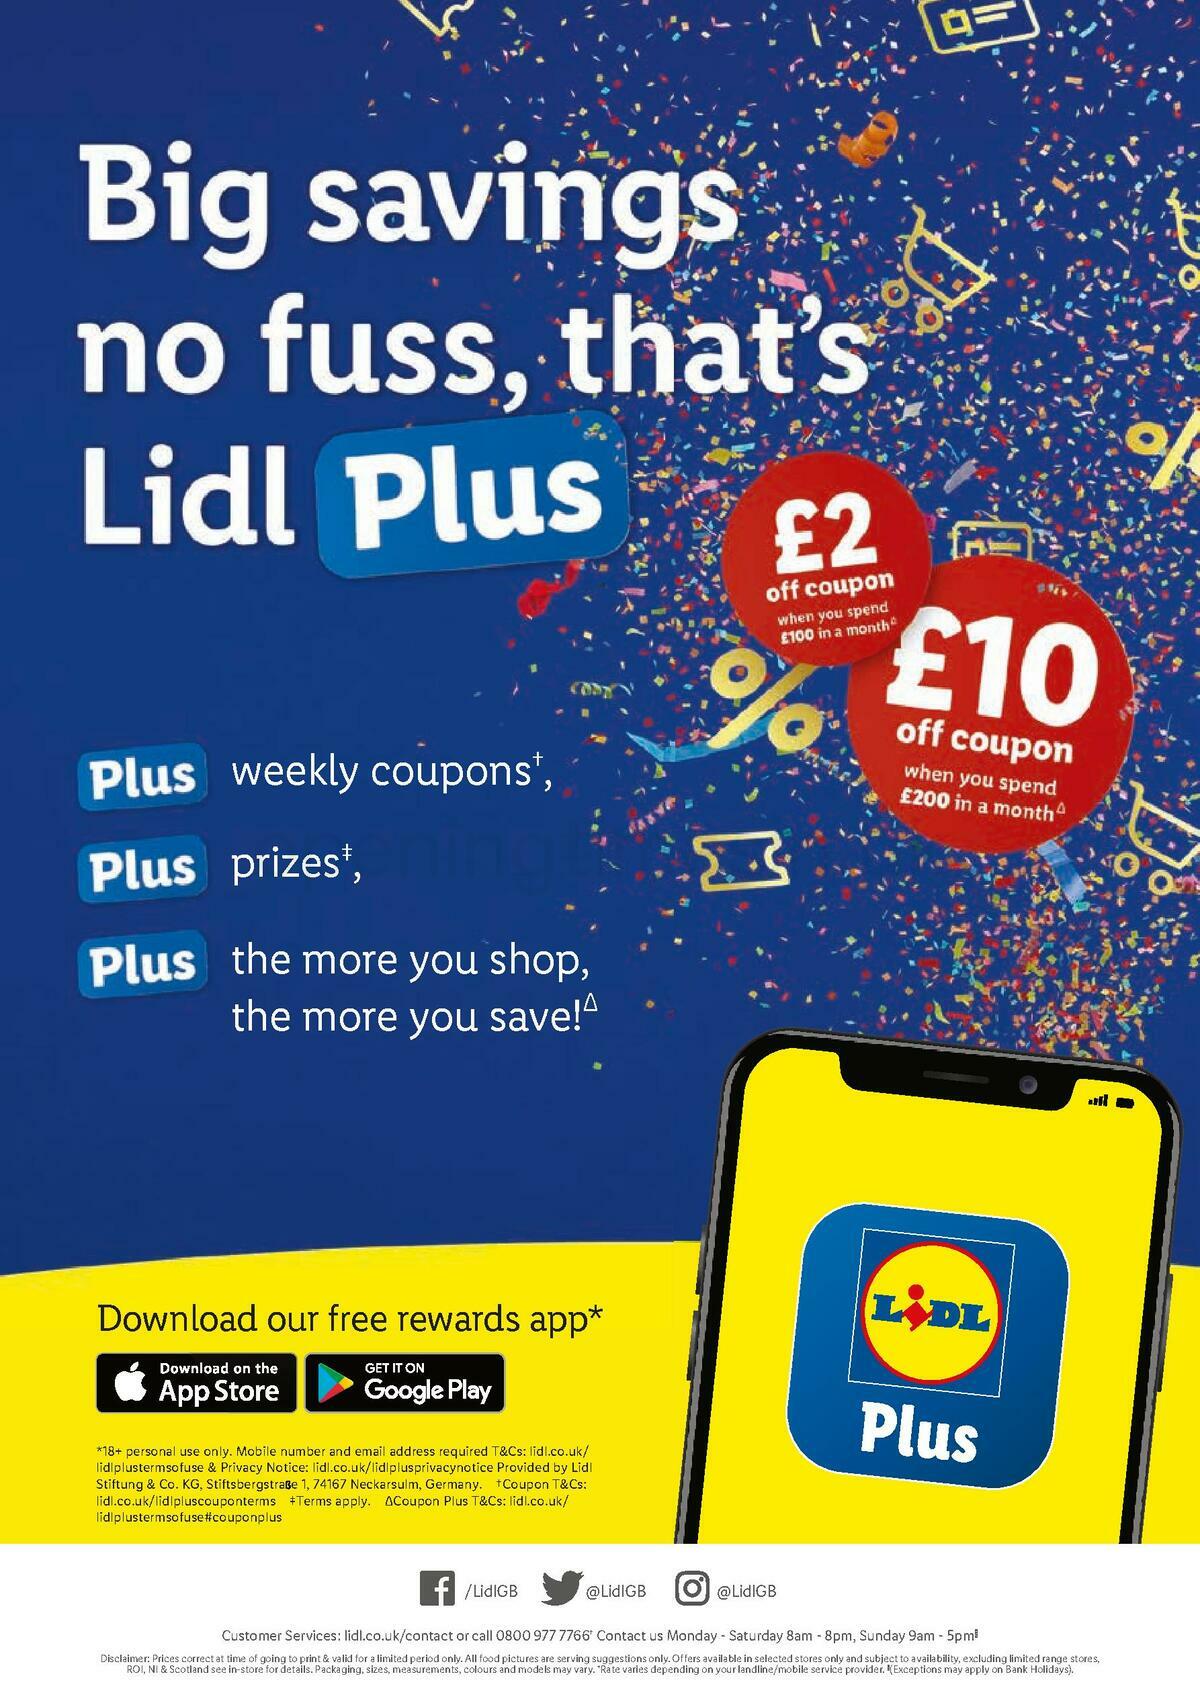 LIDL Offers from 2 June